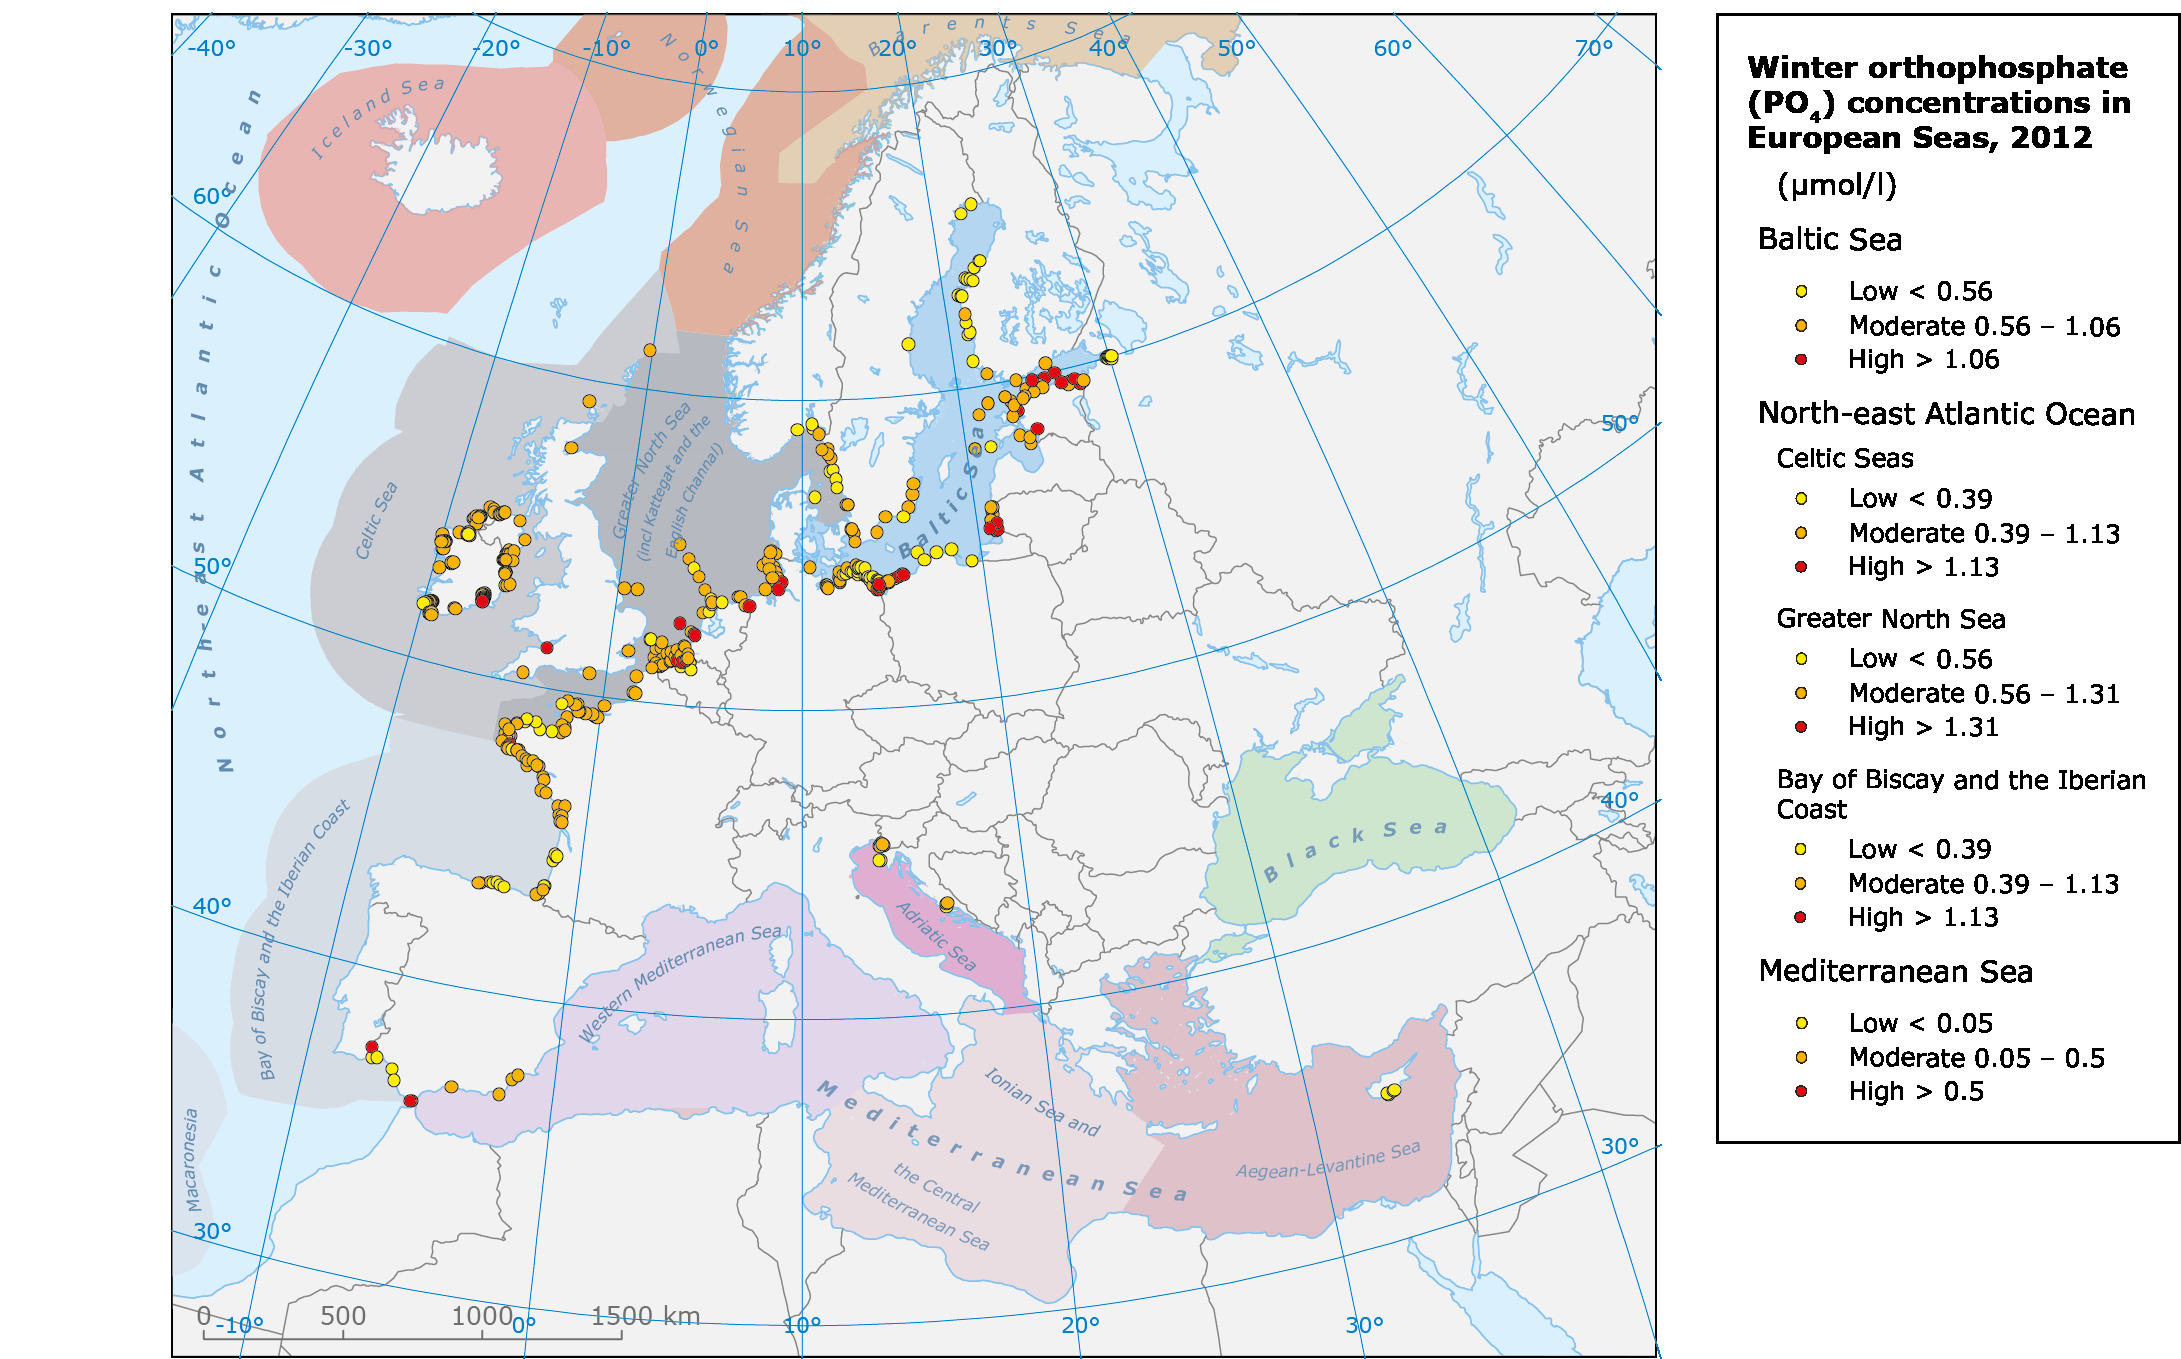 Orthophosphate concentrations in European seas